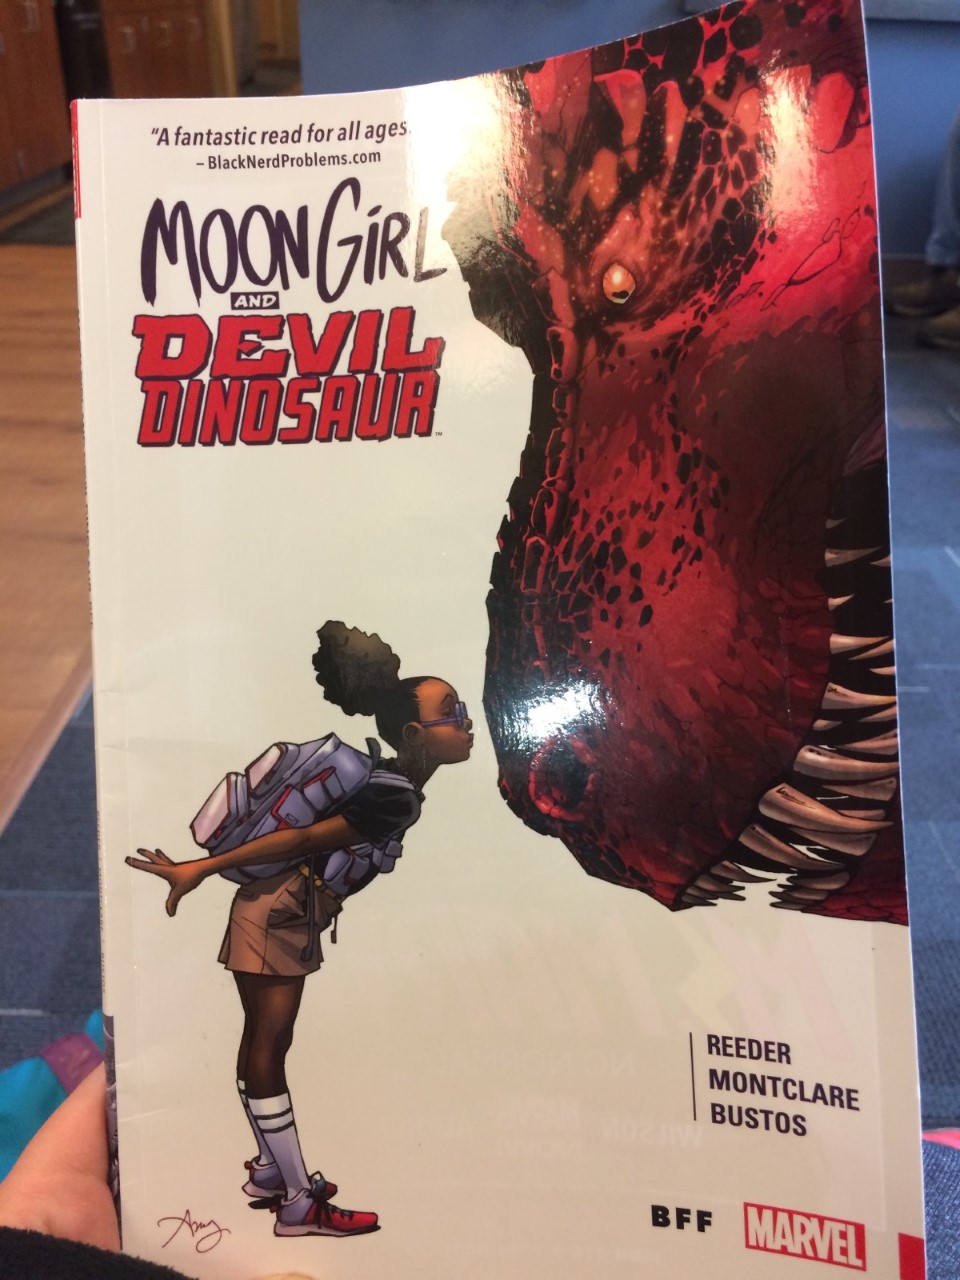 [Image is a cover of a graphic novel that I'm holding. The graphic novel is Moon Girl and Devil Dinosaur. It shows a young girl kissing a red dinosaur]